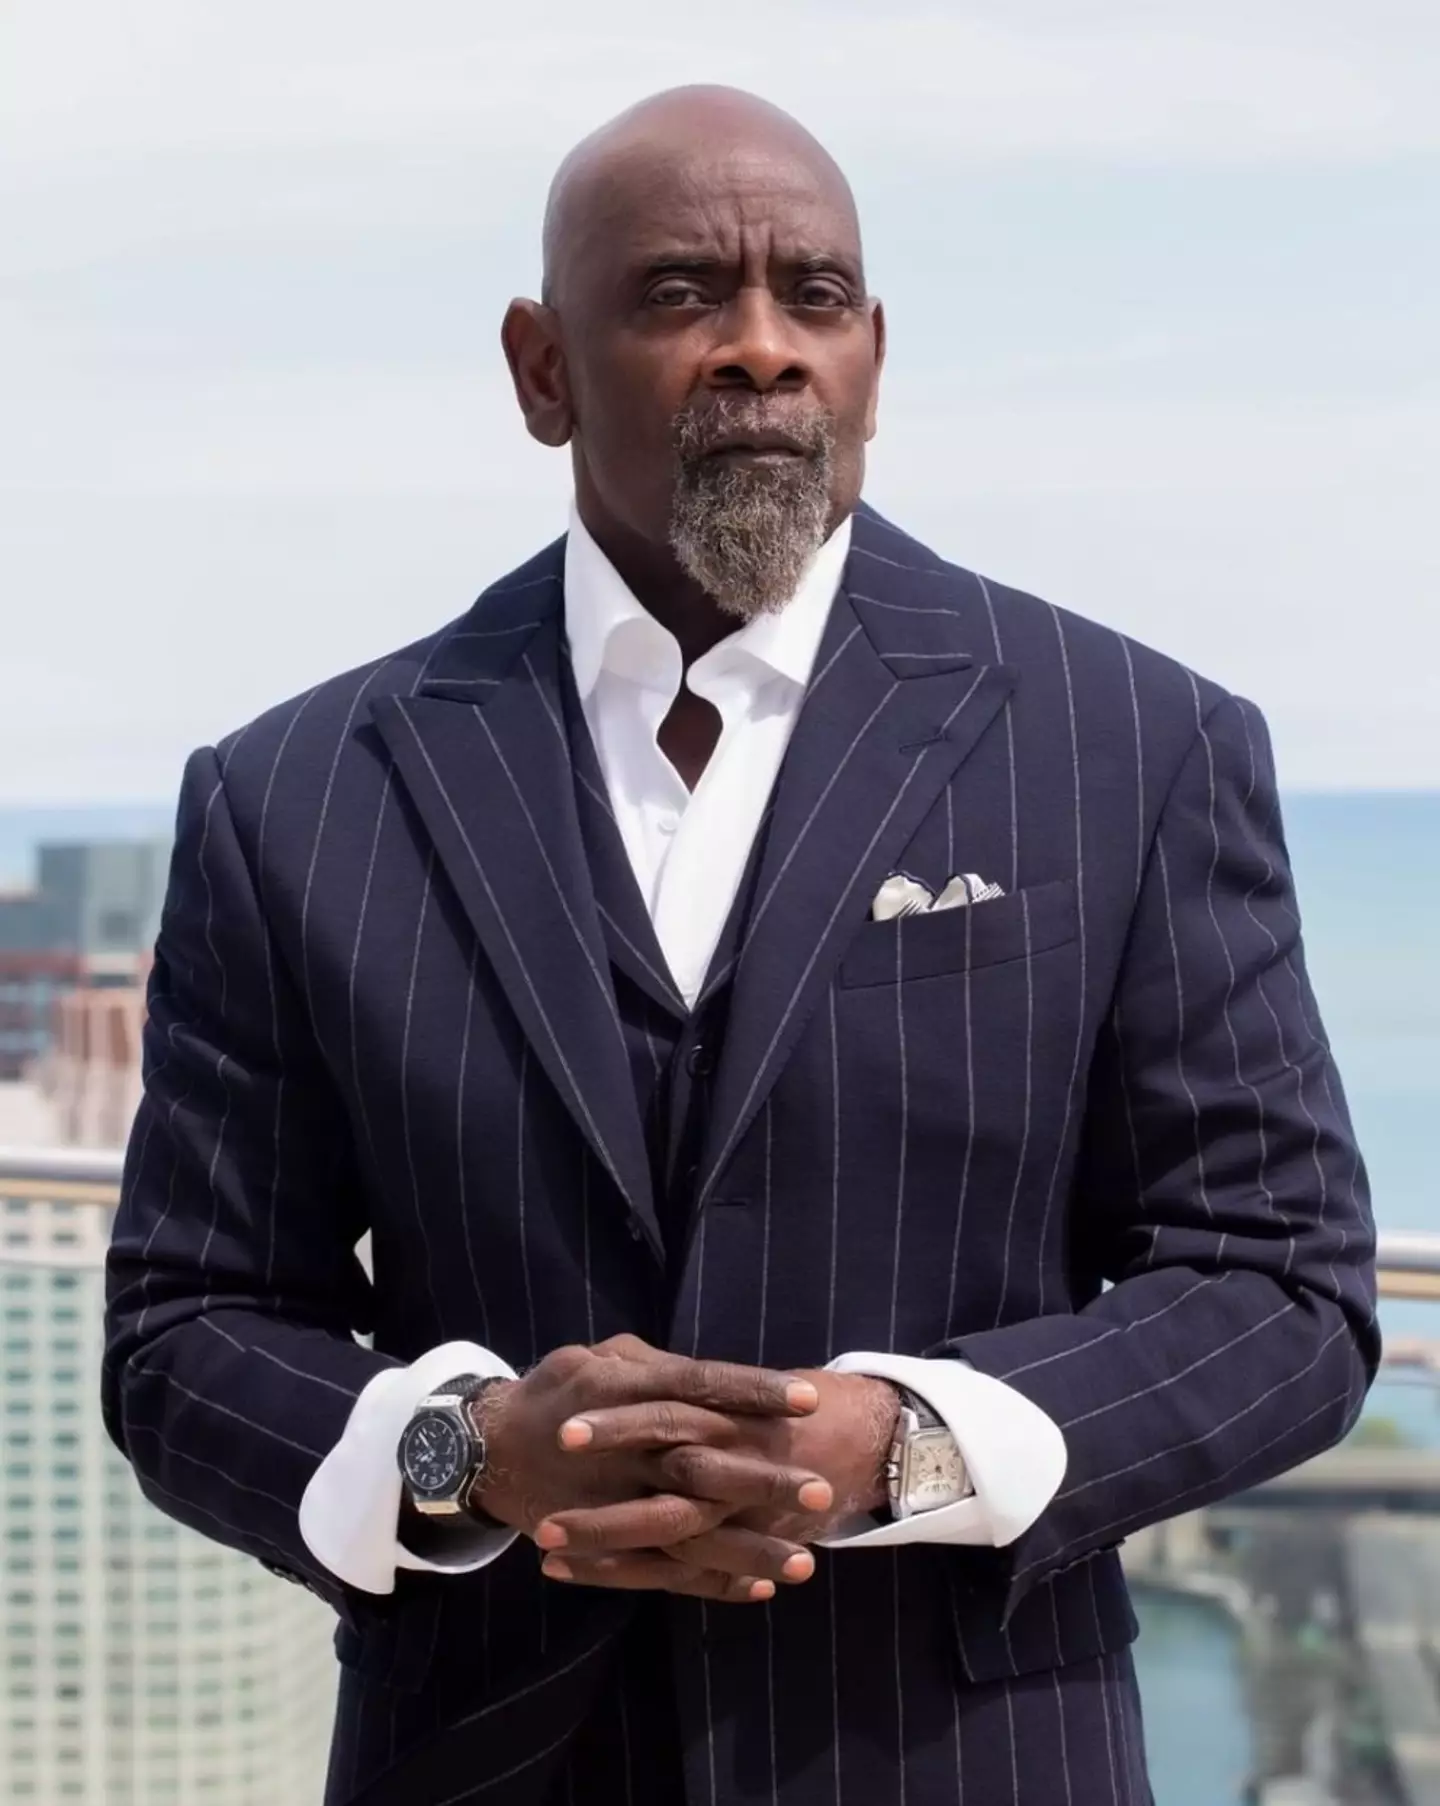 Chris Gardner's autobiography in 2006 inspired the film depicting his struggles and rise in business.